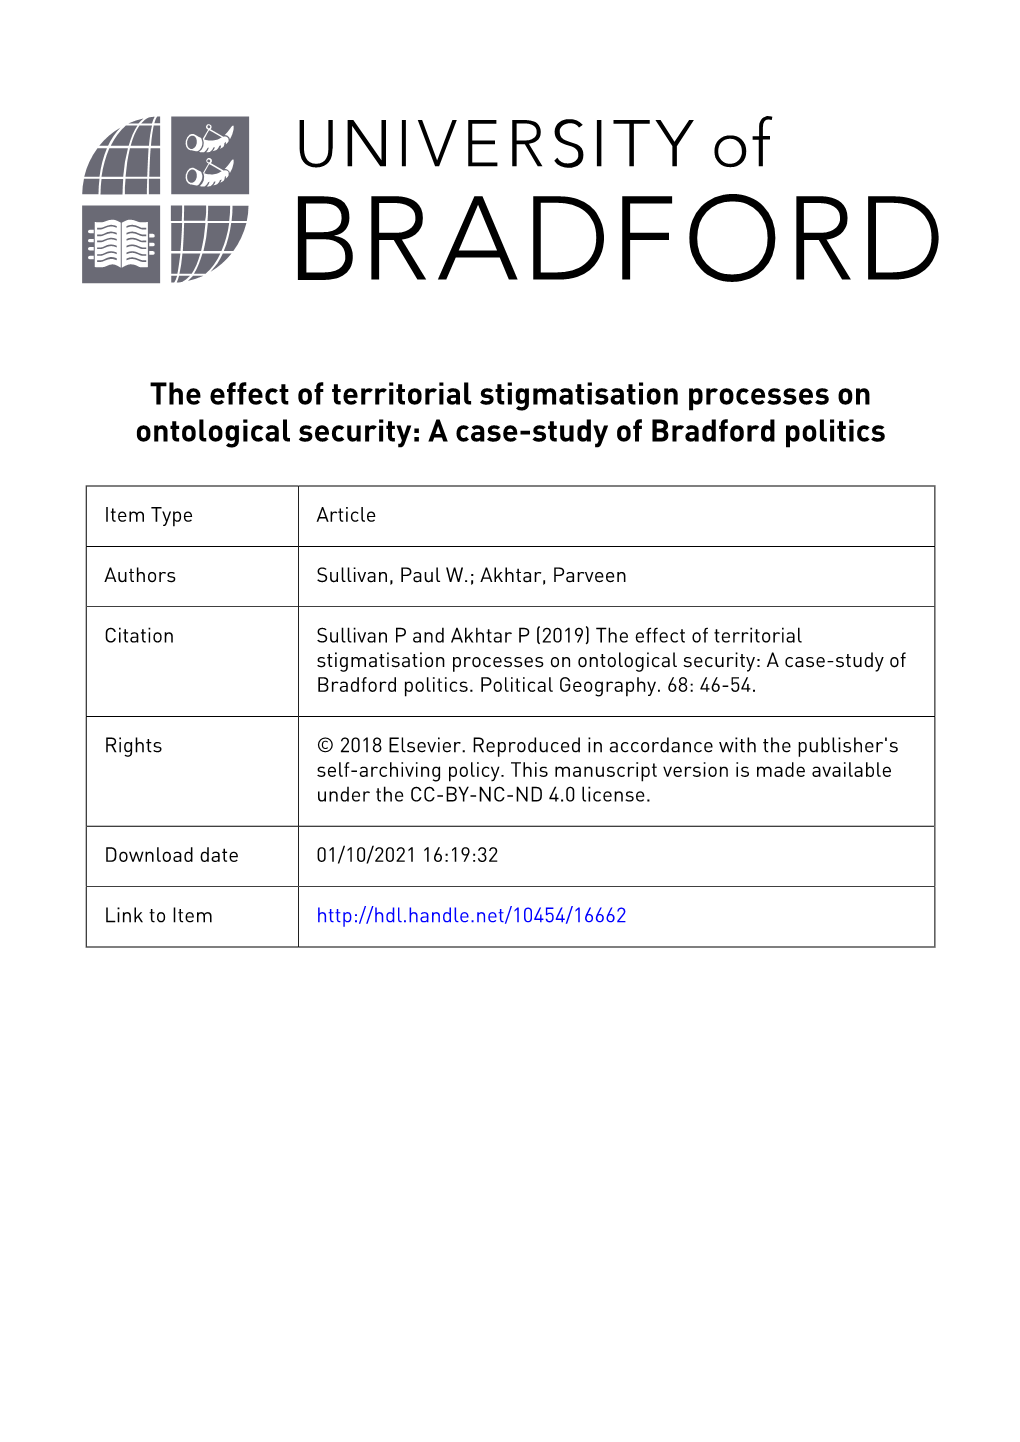 Title: the Effect of Territorial Stigmatisation on Ontological Security: a Case-Study of Bradford Politics. Dr. Paul Sullivan*